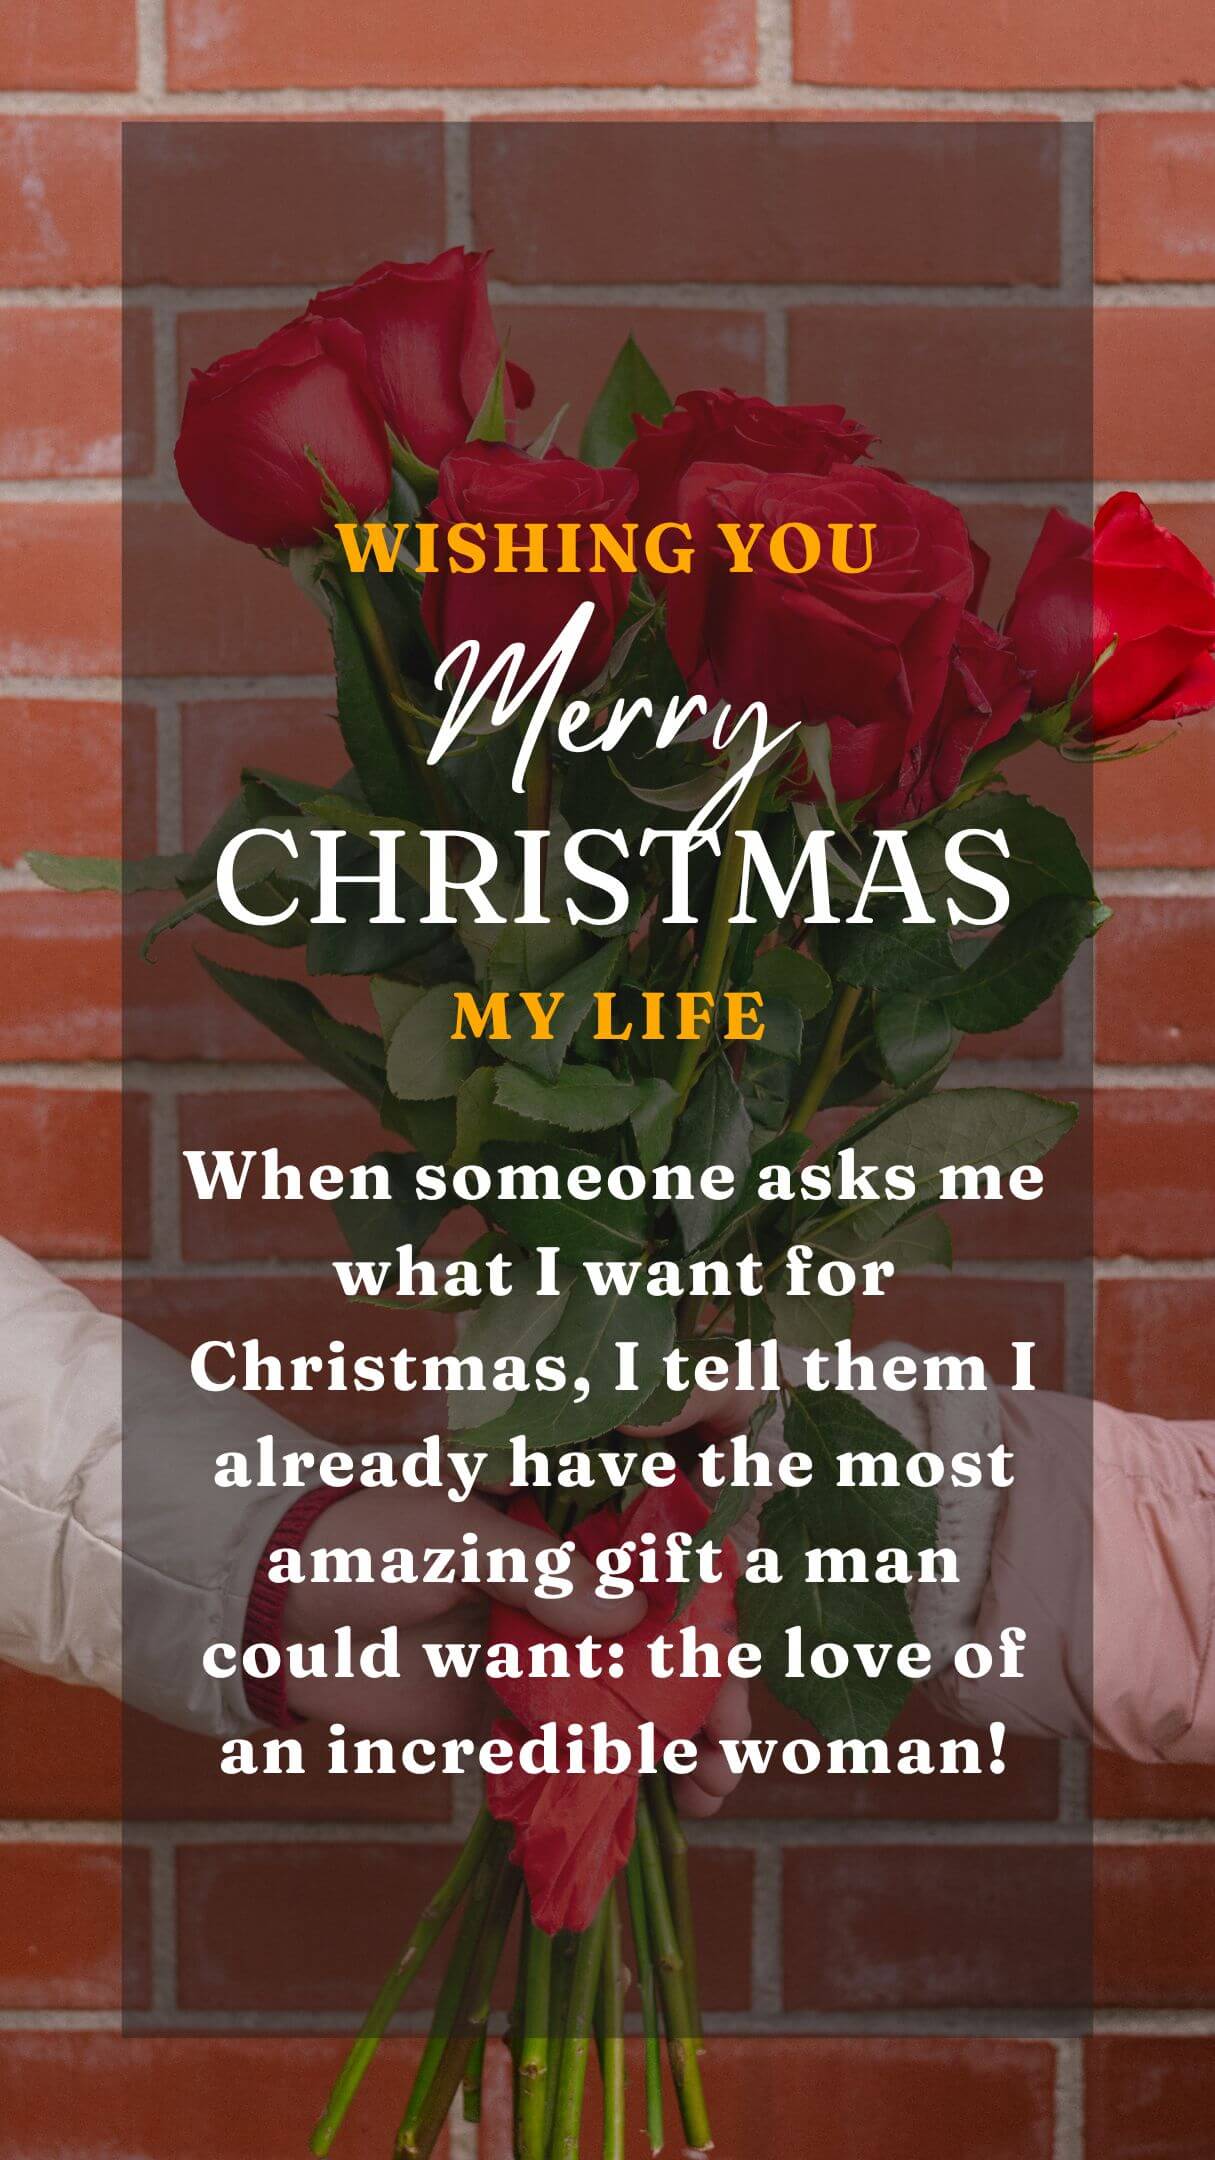 Merry Christmas Messages For Lovely Girlfriend With Images